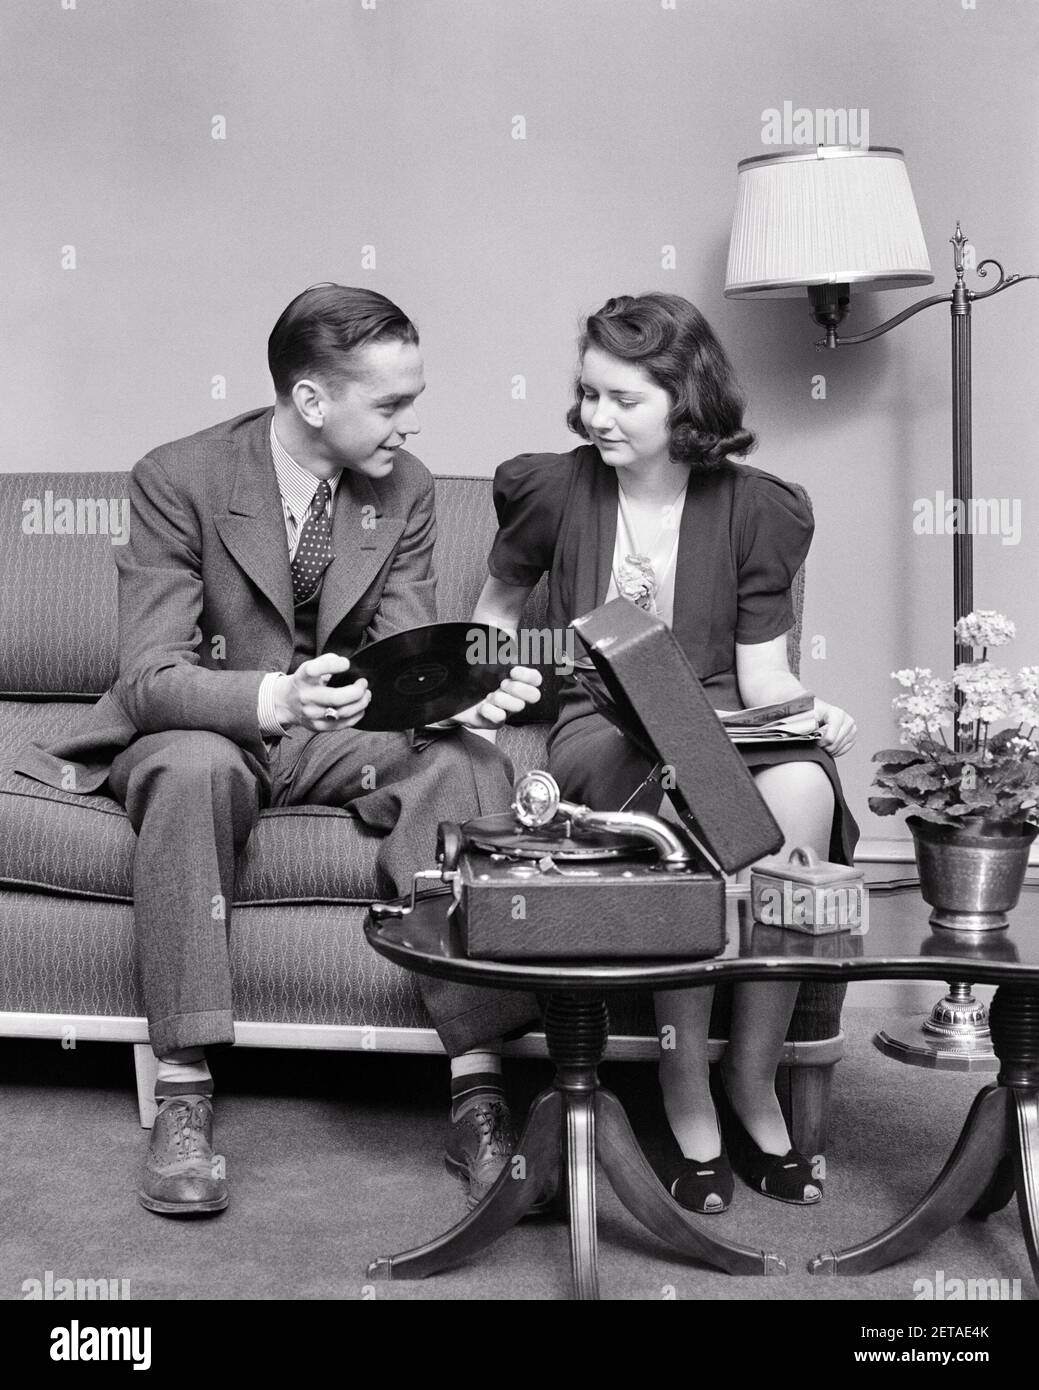 1930s 1940s YOUNG DATING COUPLE MAN AND WOMAN SITTING ON COUCH TOGETHER LISTING TO MUSIC ON PORTABLE RECORD PLAYER - s8949 HAR001 HARS NOSTALGIC PAIR ROMANCE BEAUTY SUBURBAN URBAN OLD TIME NOSTALGIA MEDIA OLD FASHION 1 SILLY JUVENILE COUCH COMMUNICATION YOUNG ADULT BALANCE COMIC TEAMWORK STRONG PLEASED JOY LIFESTYLE FEMALES HOME LIFE LUXURY COPY SPACE FRIENDSHIP FULL-LENGTH LADIES PERSONS CARING MALES TEENAGE GIRL TEENAGE BOY ENTERTAINMENT PORTABLE B&W DATING TEMPTATION HUMOROUS HAPPINESS CHEERFUL LEISURE AND CHOICE EXCITEMENT RECREATION COMICAL INNOVATION ON TO SMILES CONNECTION 78 RPM Stock Photo